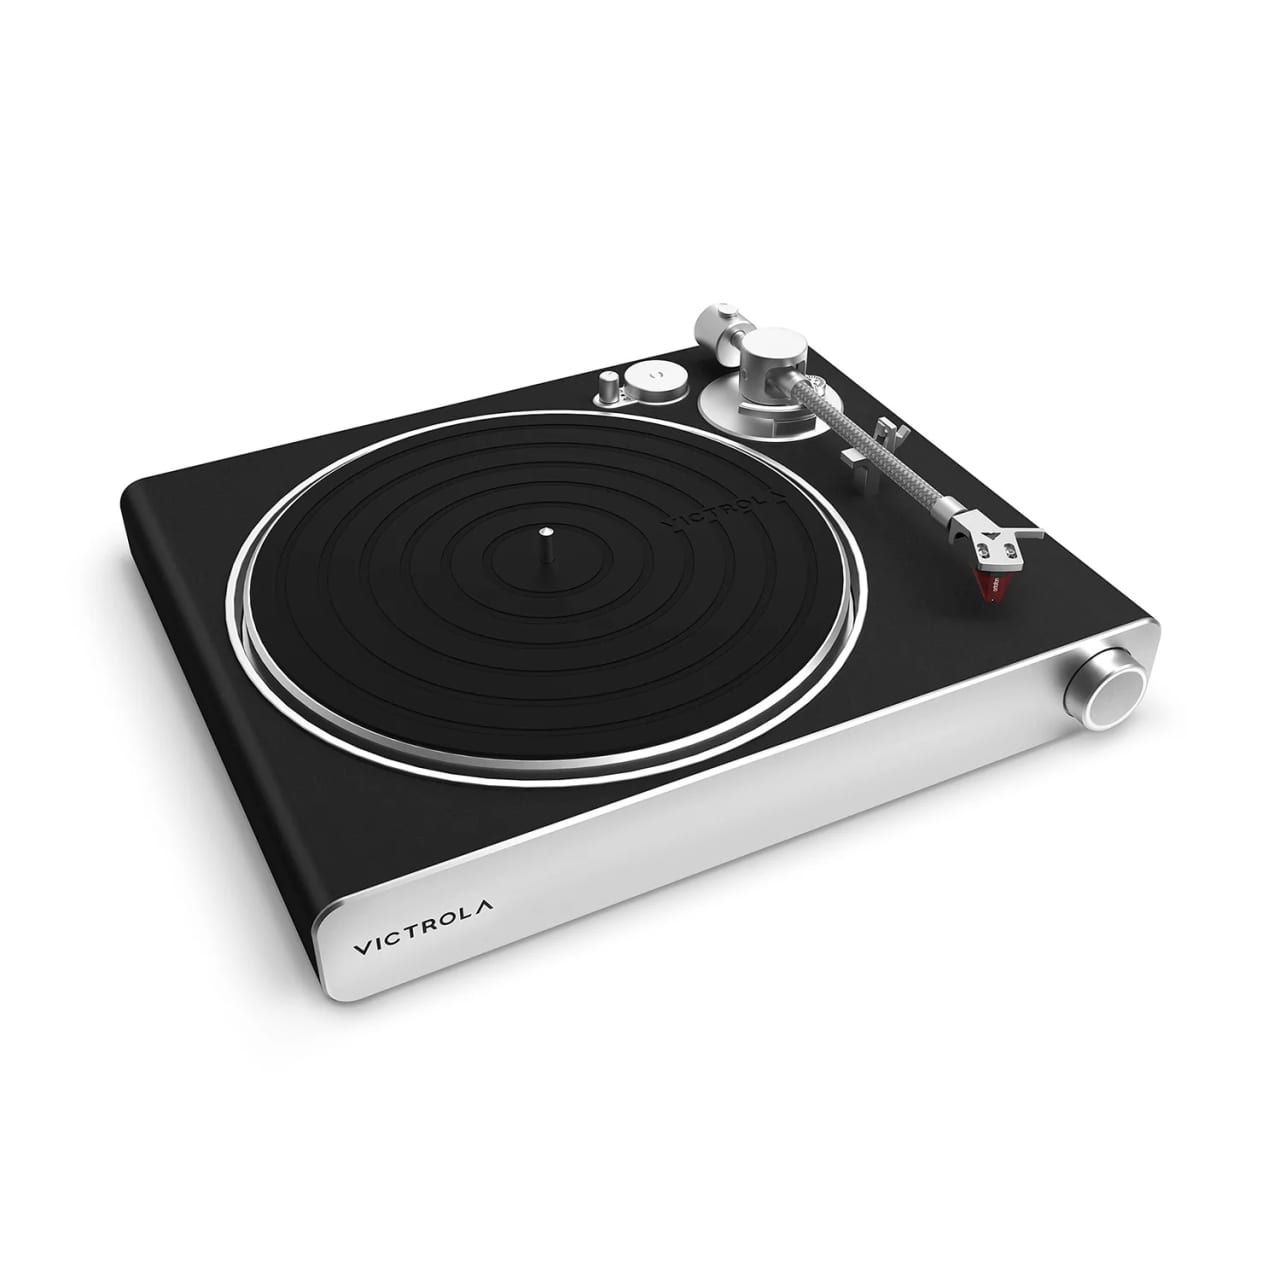 Stream Carbon works with Sonos turntables